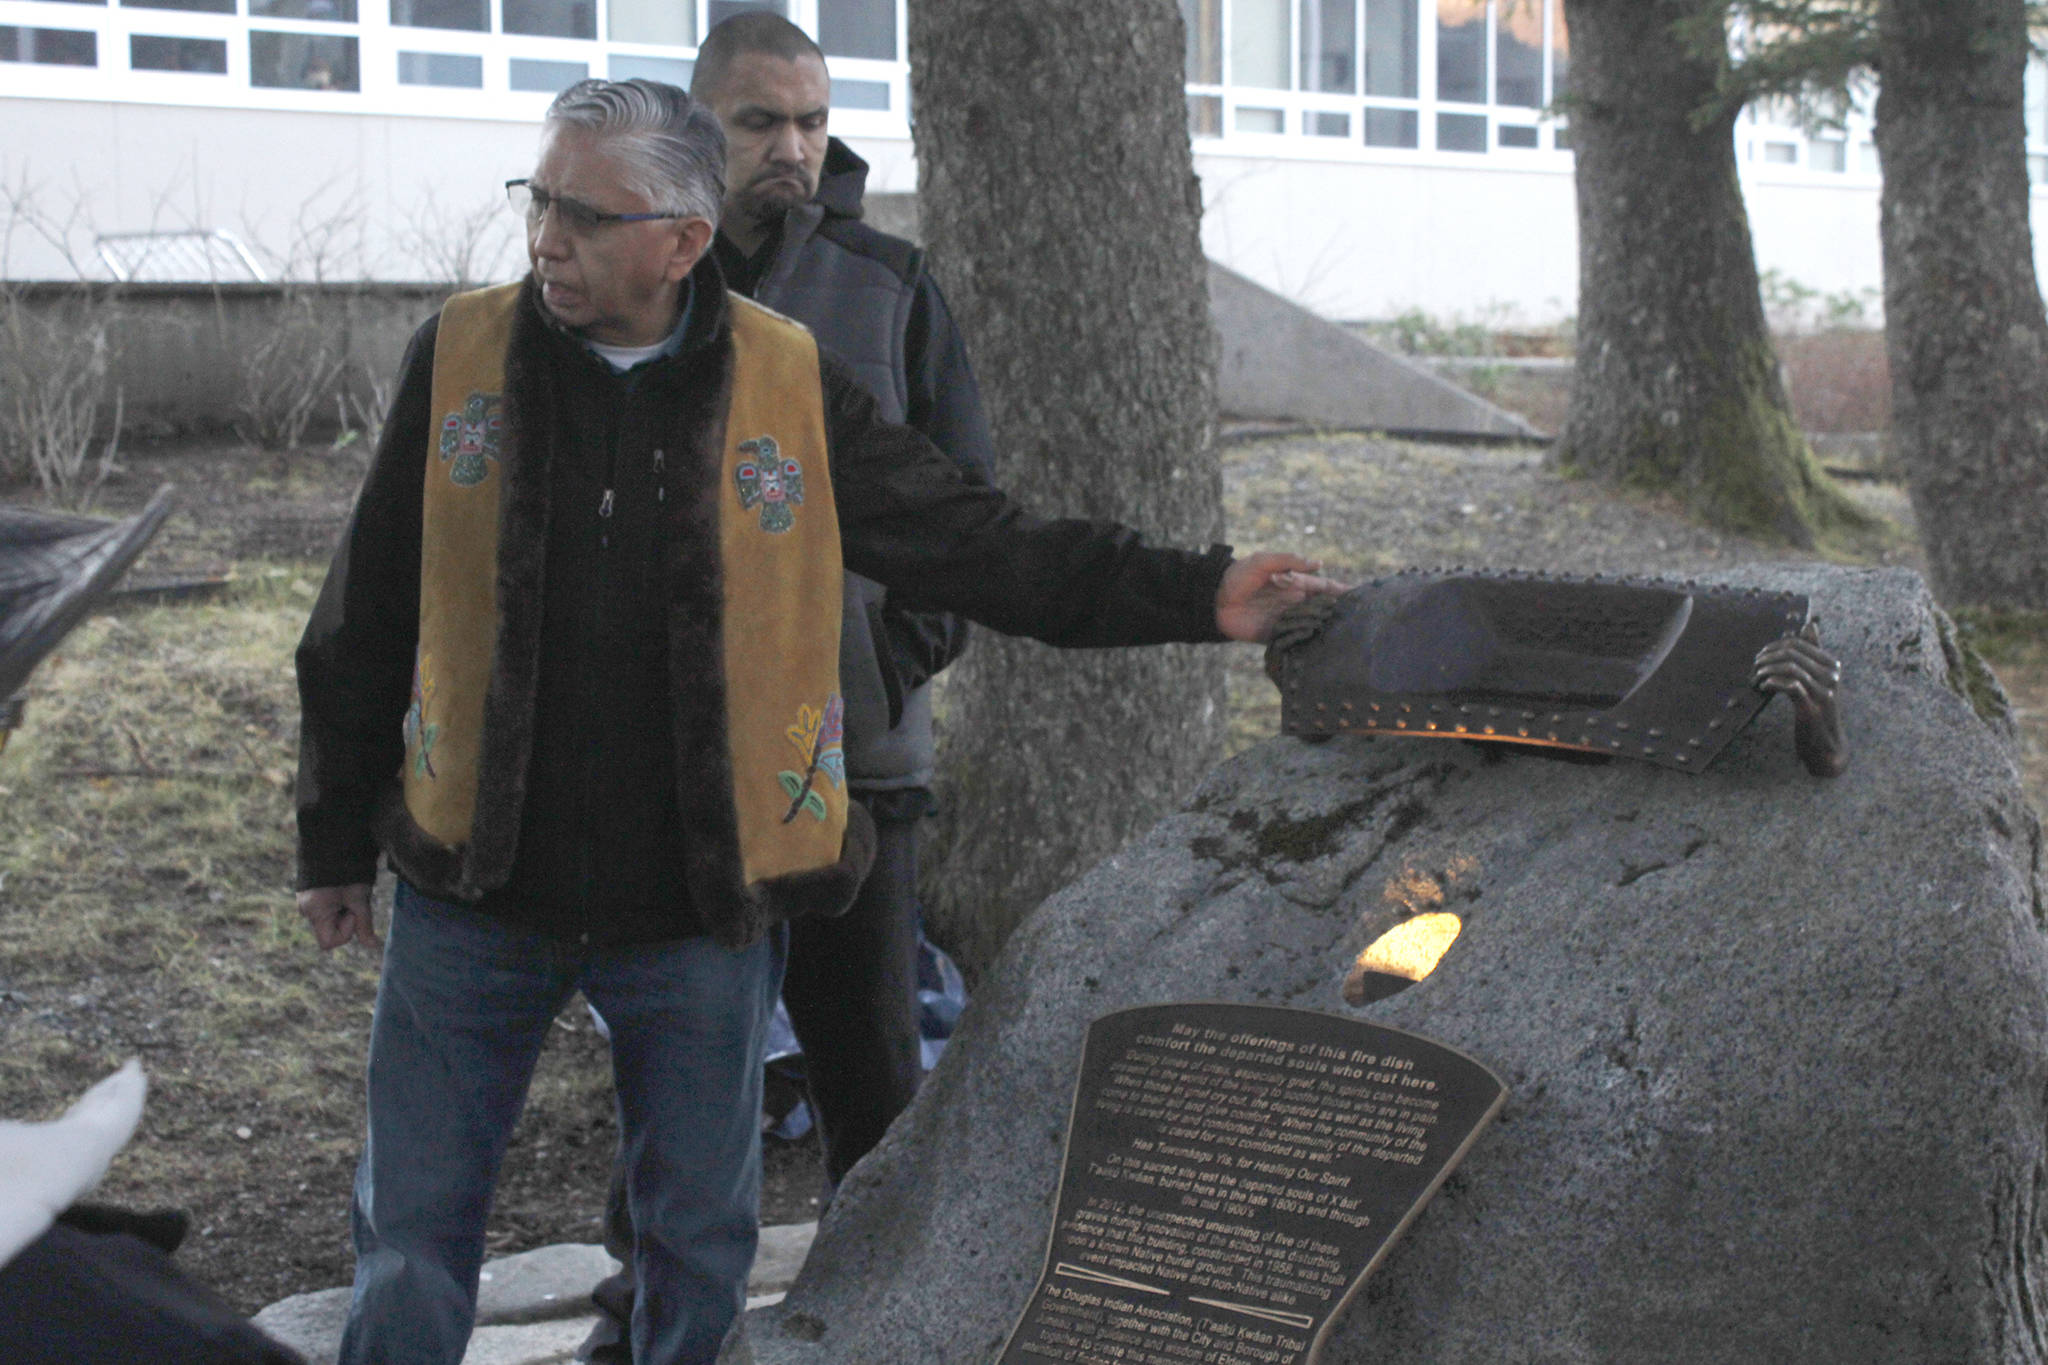 In this photo taken Nov. 23, 2018, Tlingit elder Paul Marks presents the Sayéik Sacred Site Memorial in Juneau, Alaska. The memorial, placed at Sayéik Gastineau Community School, is a tribute to the people who were buried in the Tlingit burial ground that was paved over for the road and school. (Alex McCarthy/The Juneau Empire via AP)